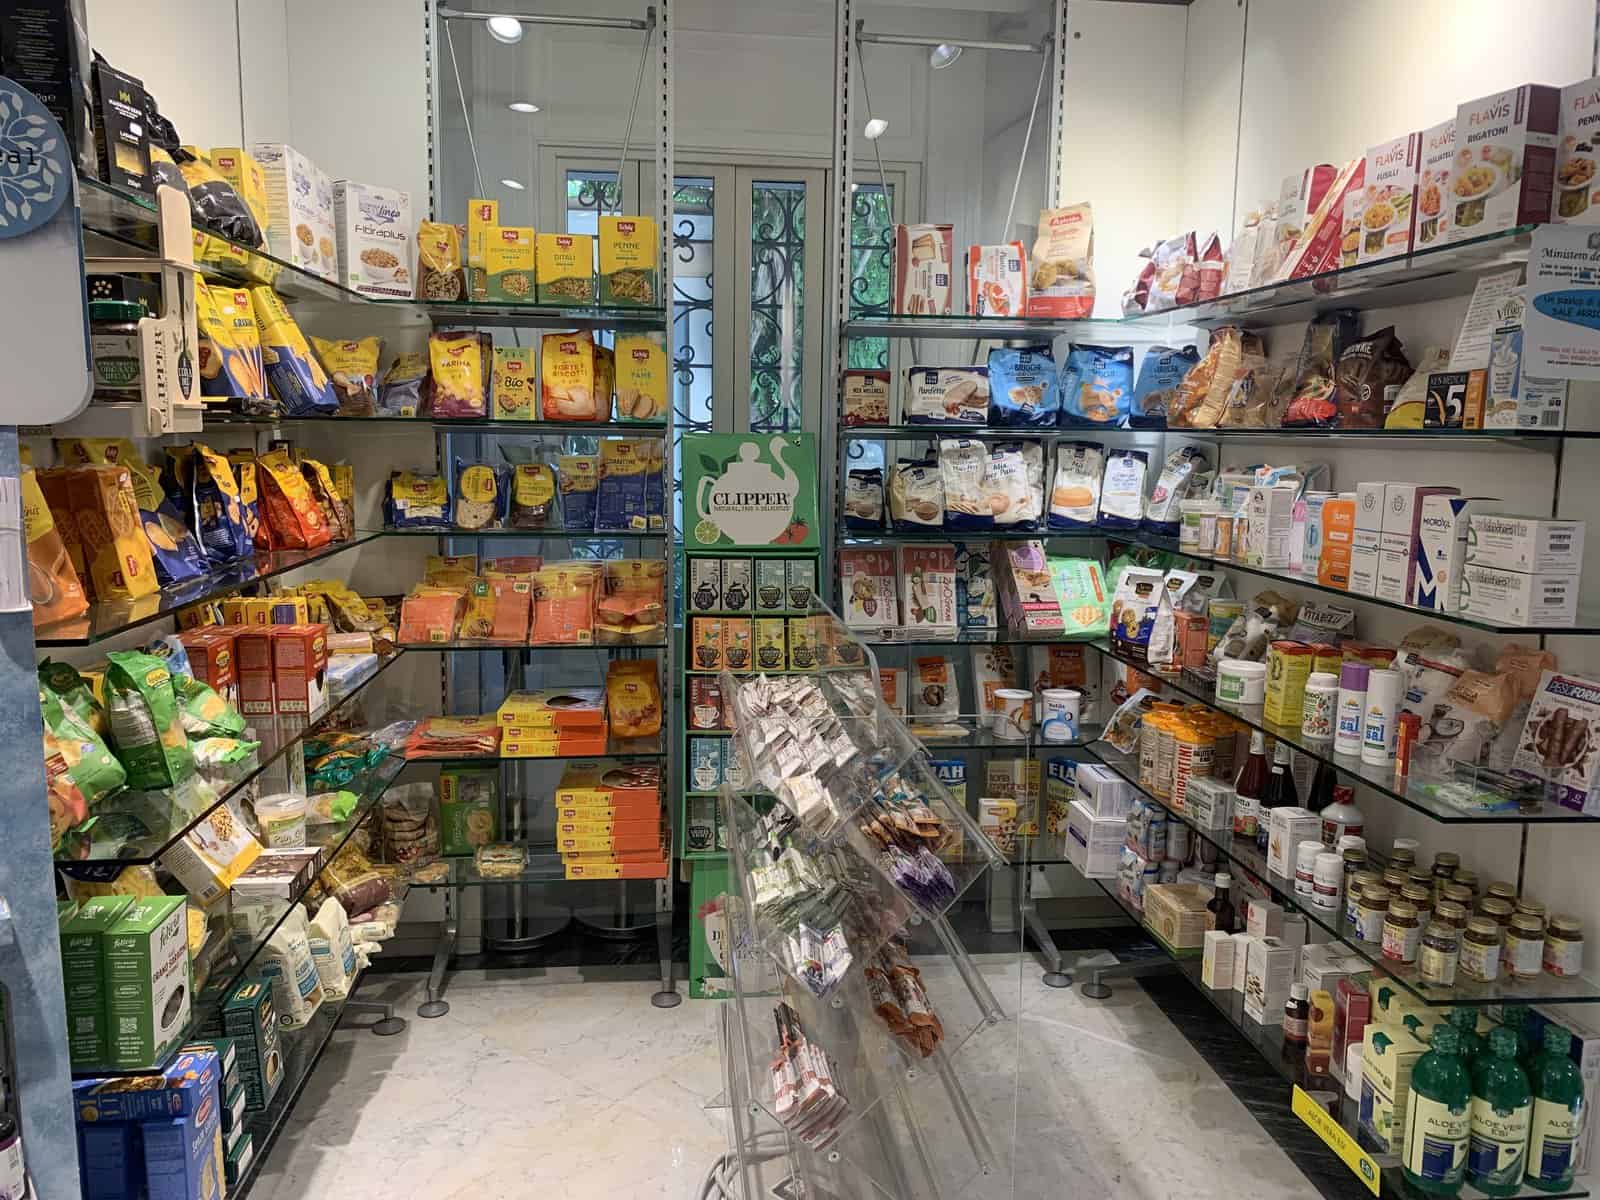 gluten-free section of the pharmacy